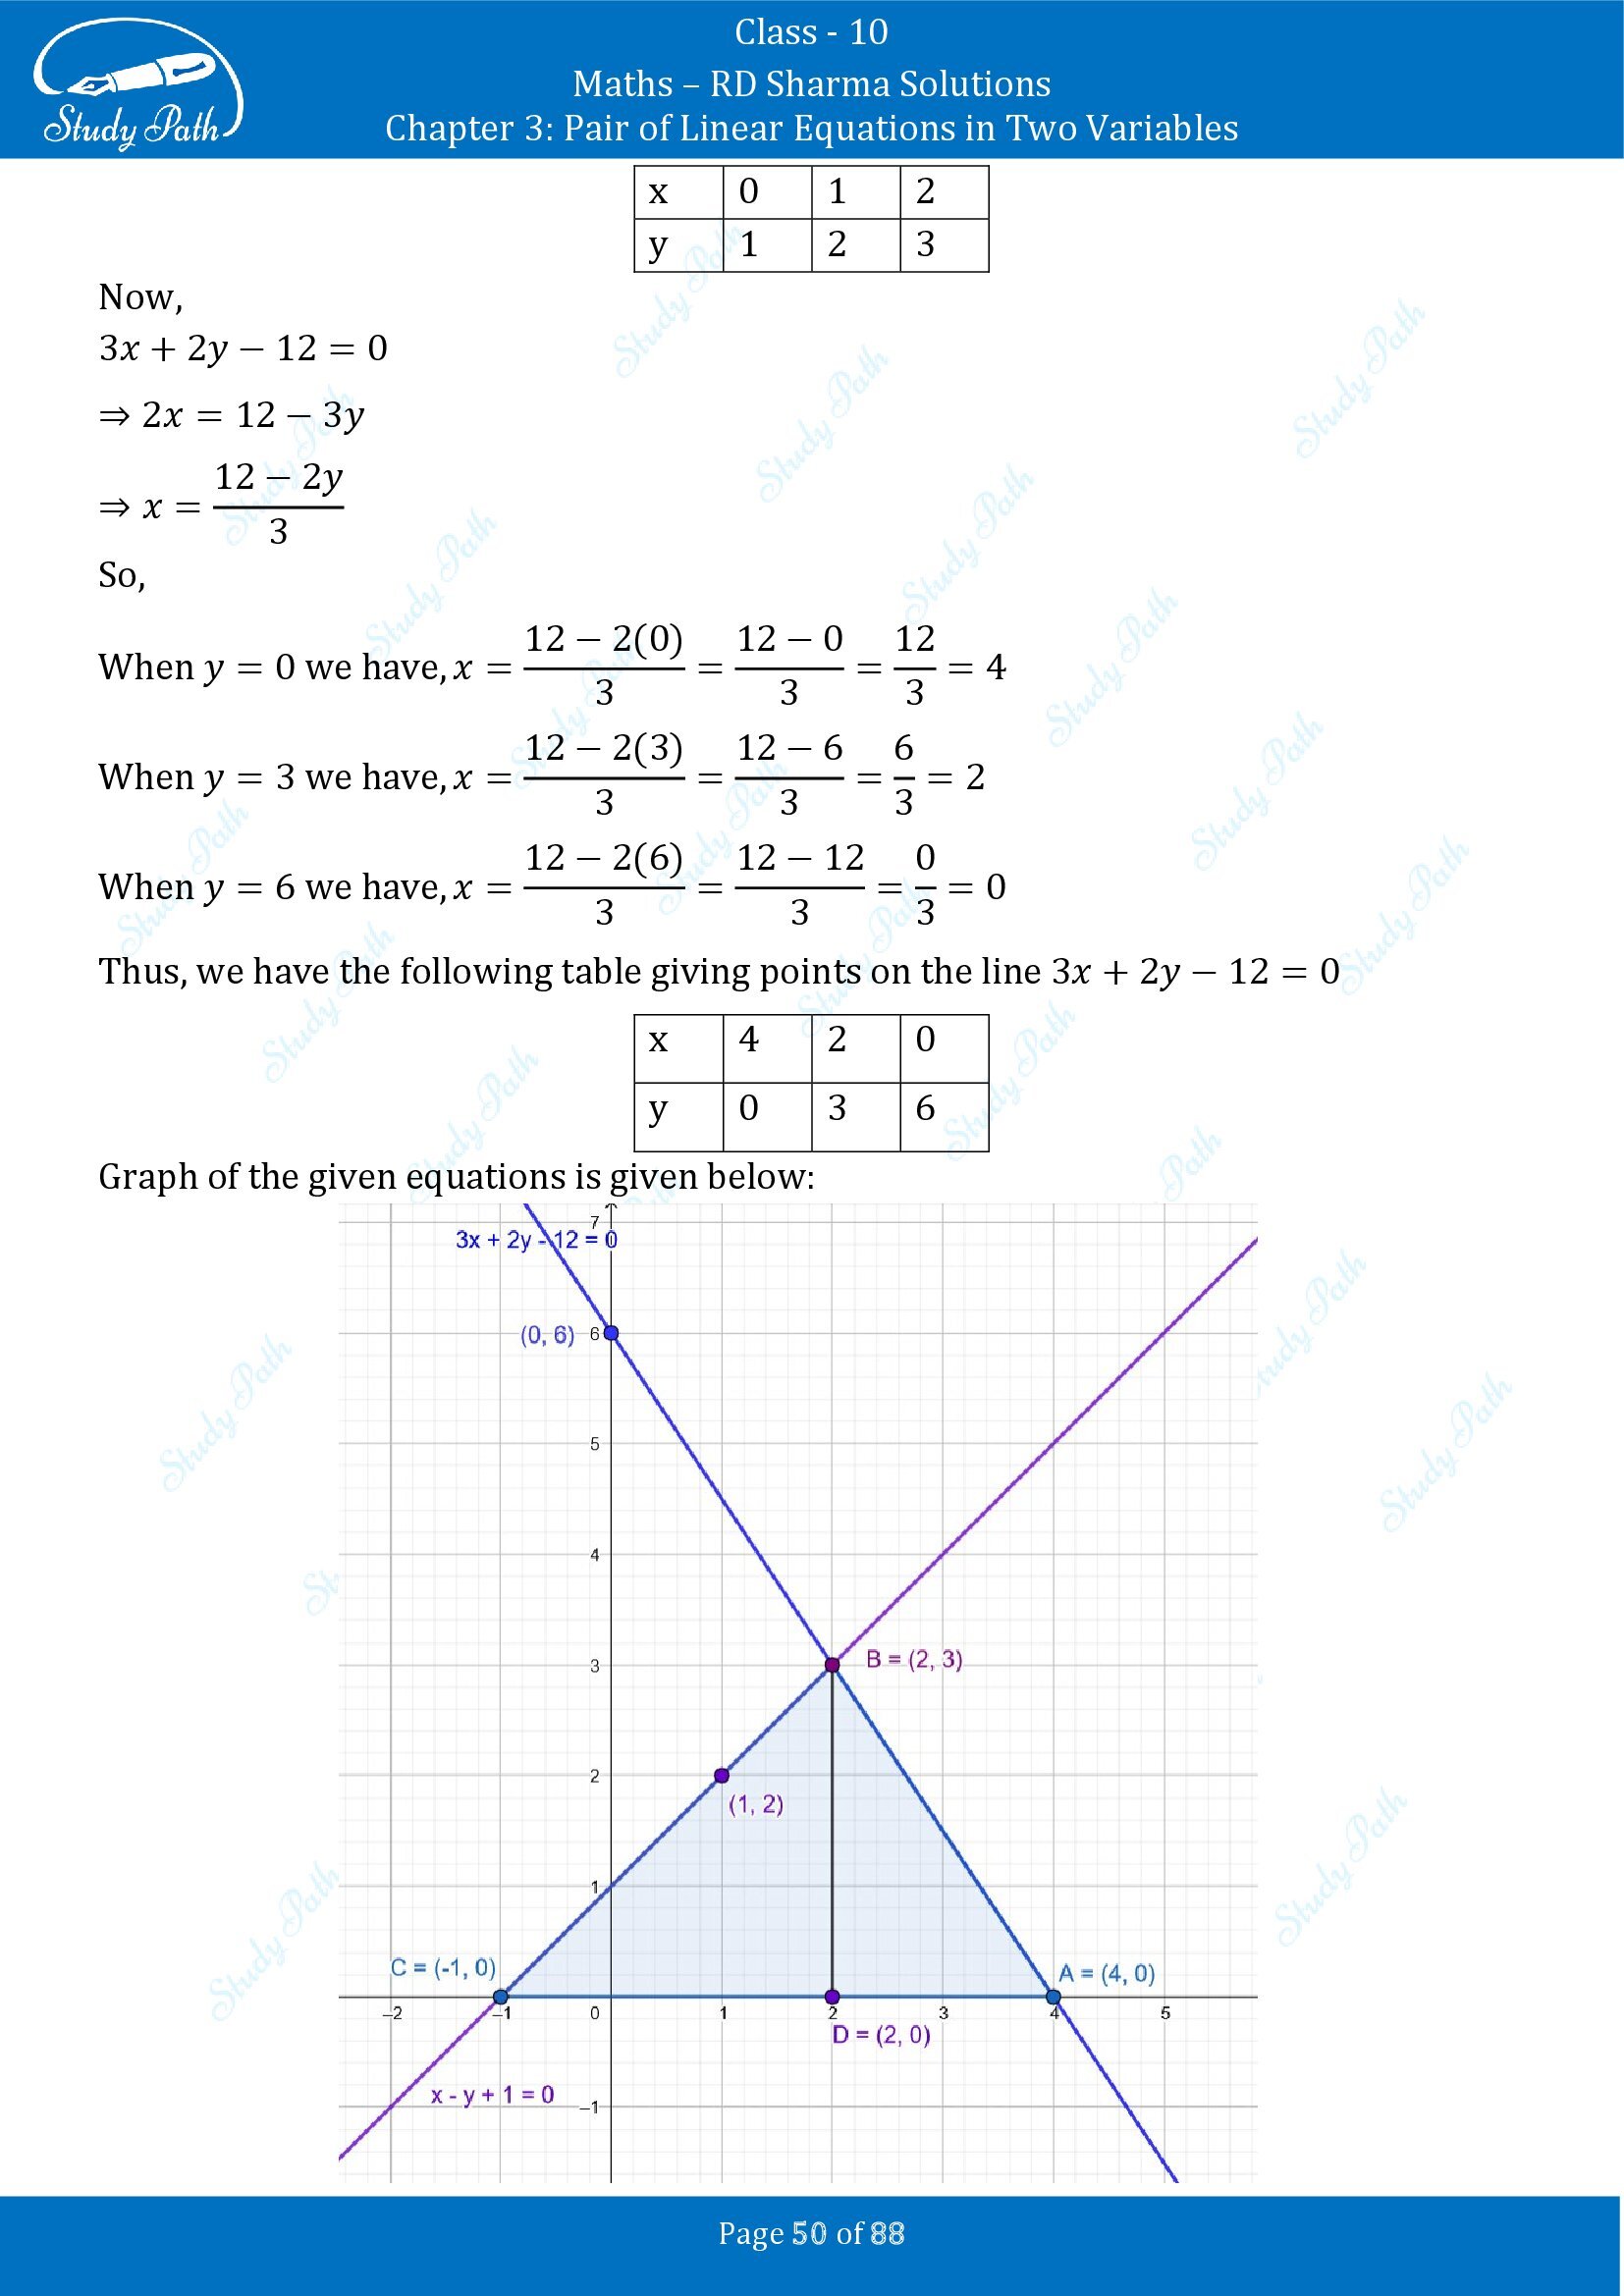 RD Sharma Solutions Class 10 Chapter 3 Pair of Linear Equations in Two Variables Exercise 3.2 00050